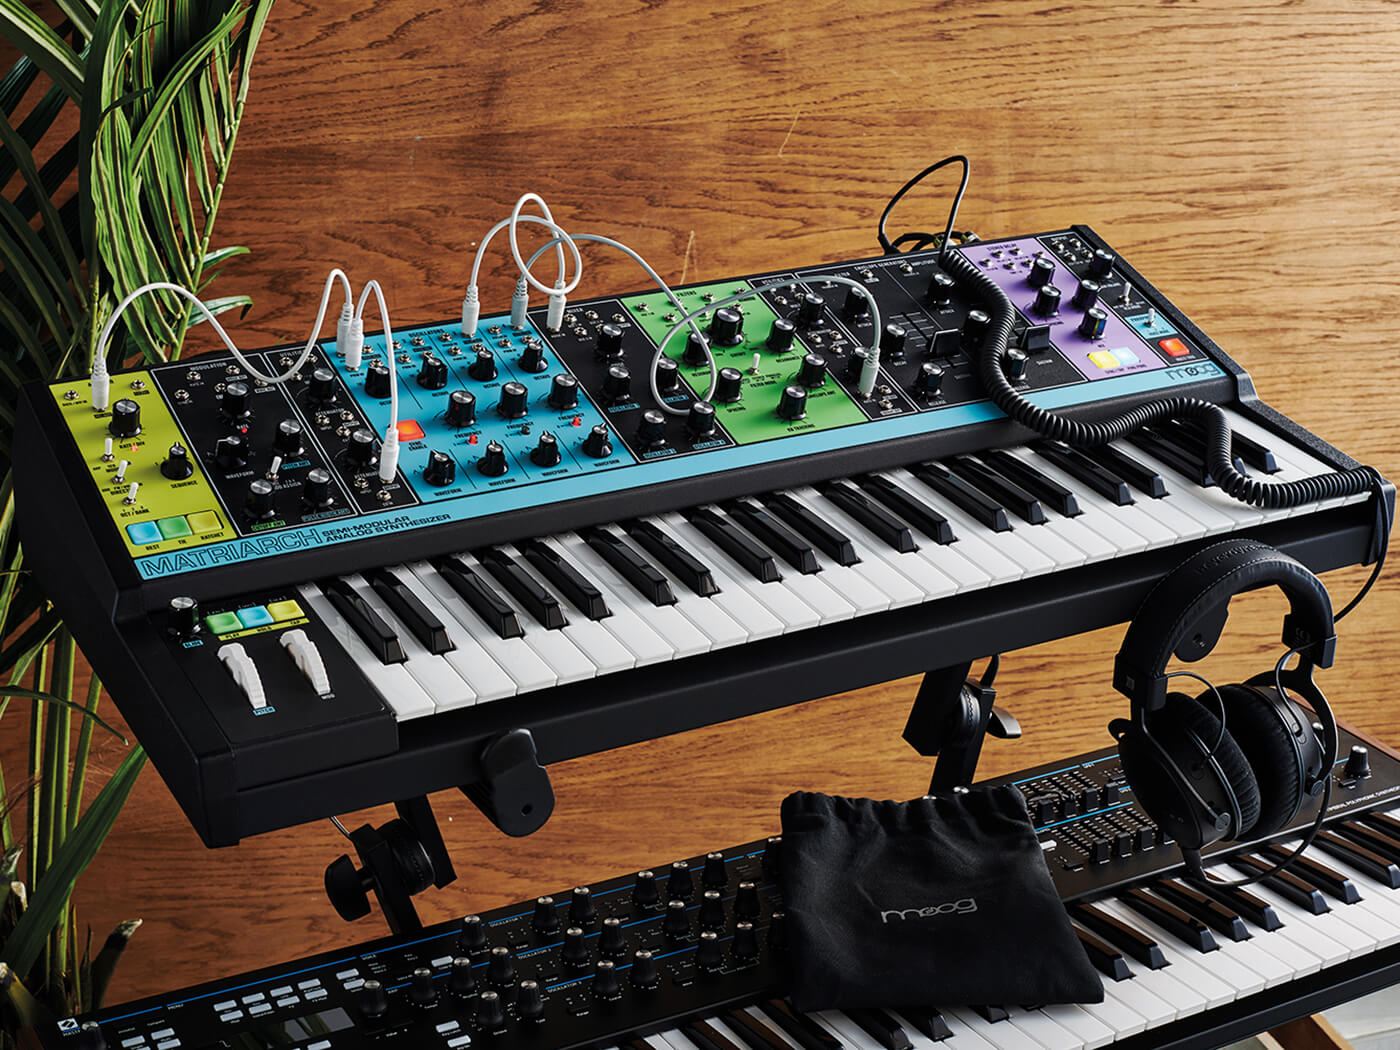 A Moog Matriarch synthesizer, photo by Olly Curtis/Future Publishing via Getty Images